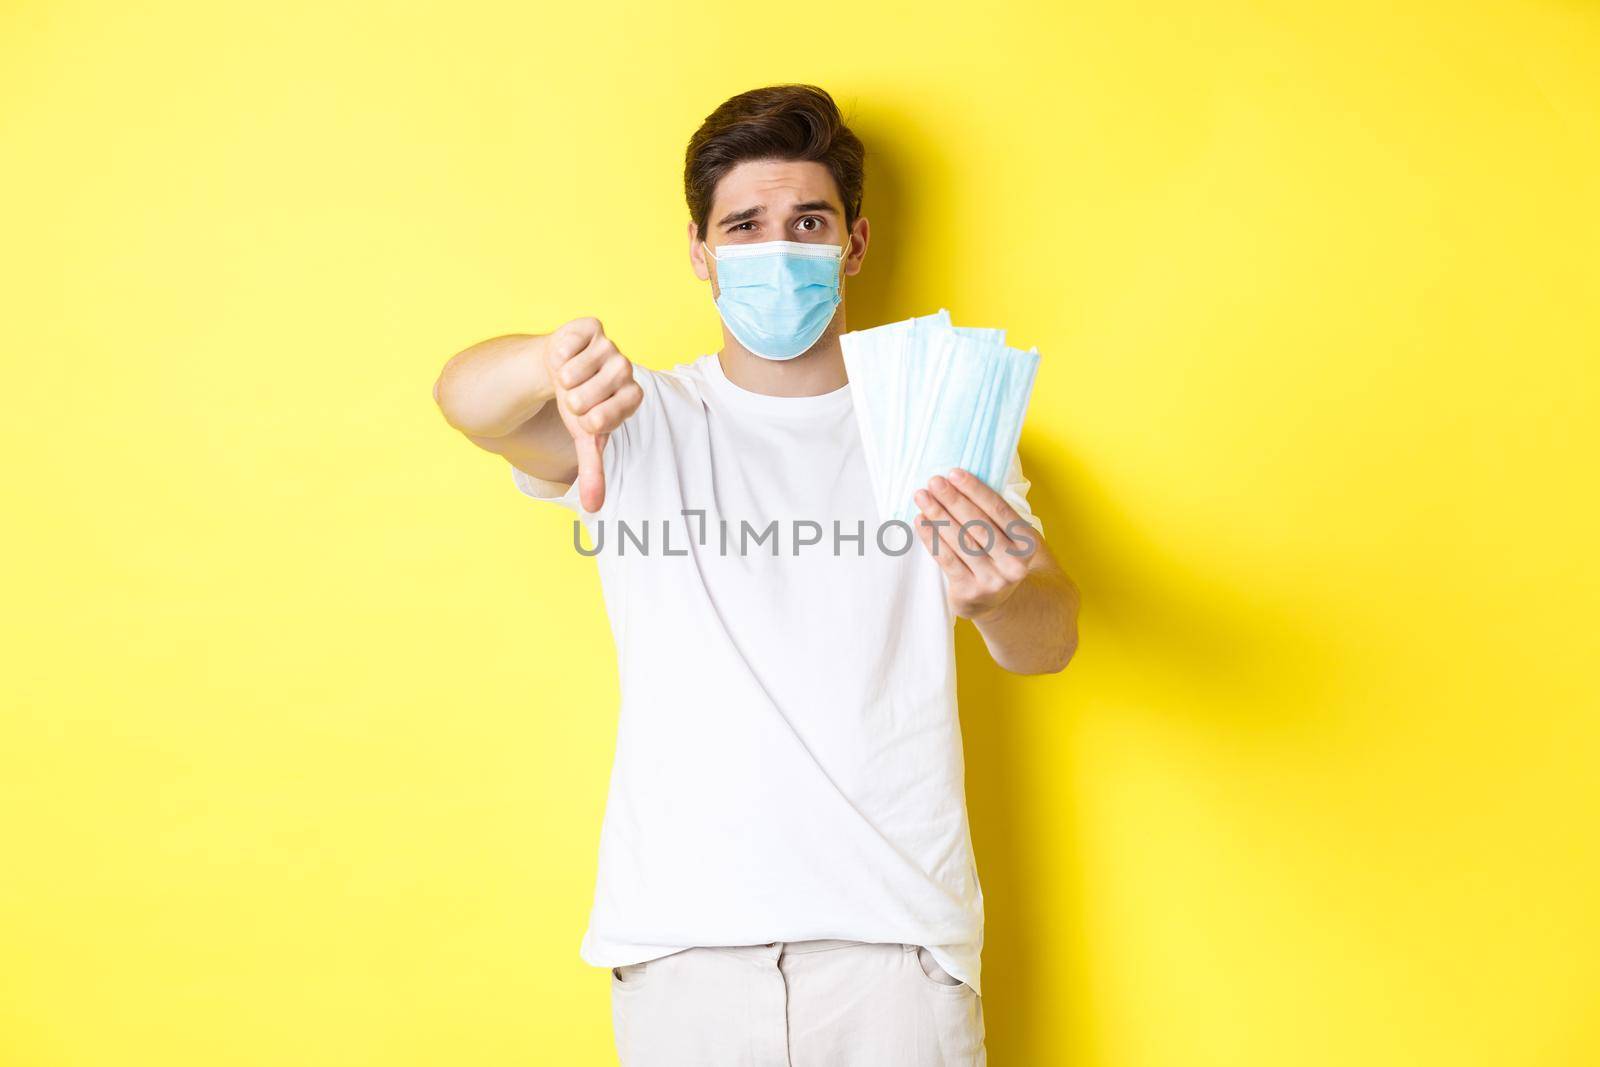 Concept of covid-19, quarantine and preventive measures. Man looking disappointed and showing thumb down, do not recommend bad medical masks, standing over yellow background.